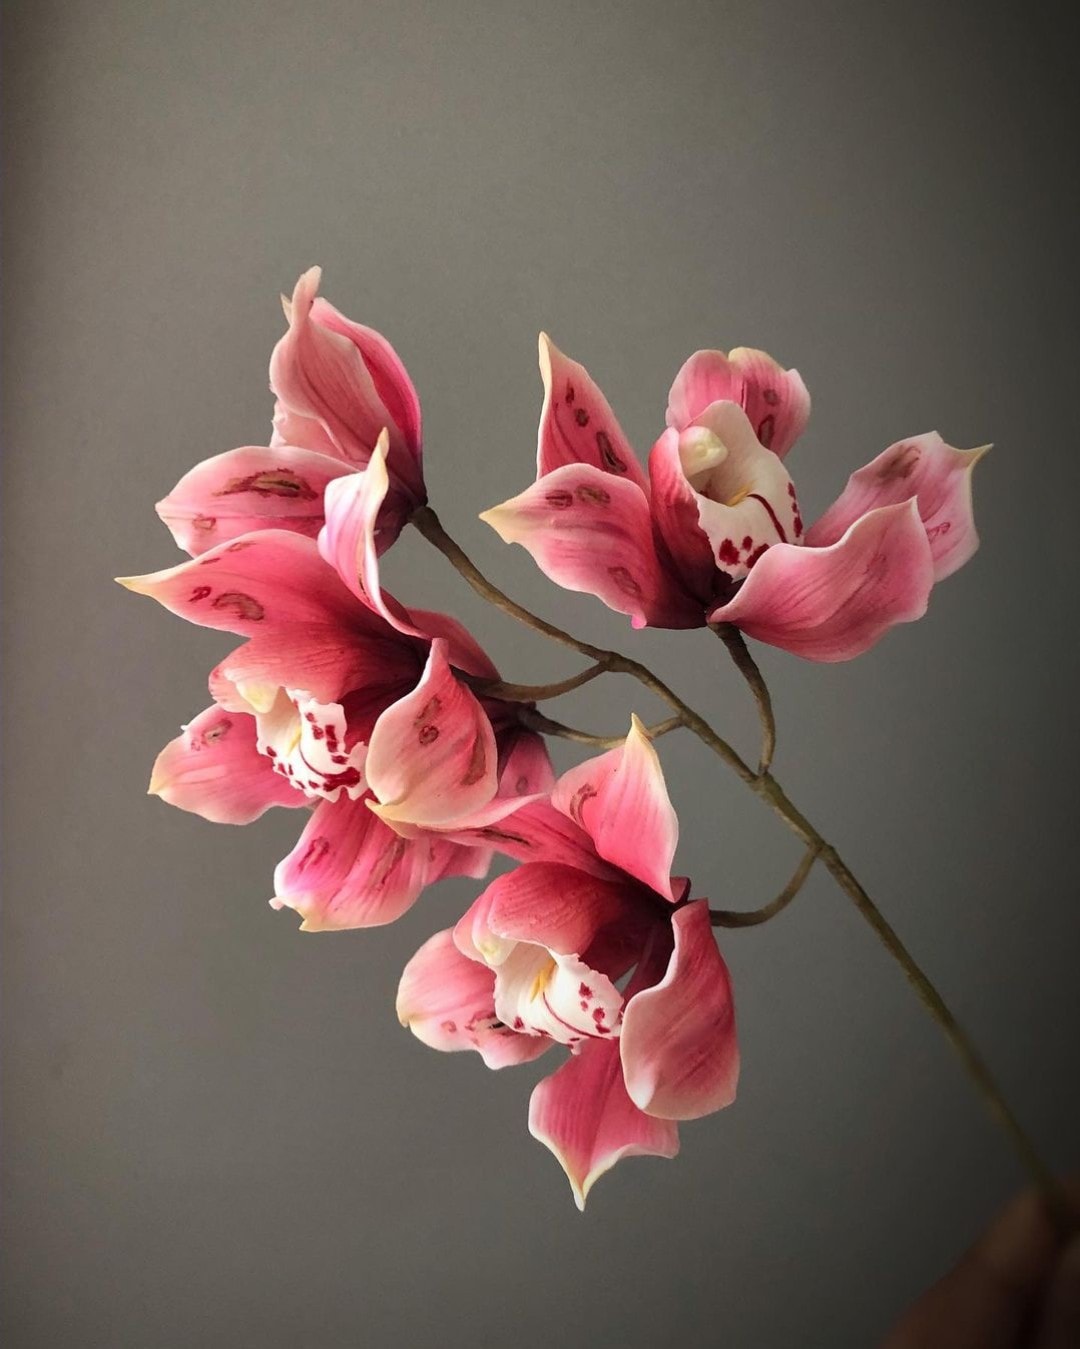 Ultra Realistic Sugar Flowers That You Can Hardly Distinguish From the Real Thing by Michelle Nguyen Orchid on Thursd